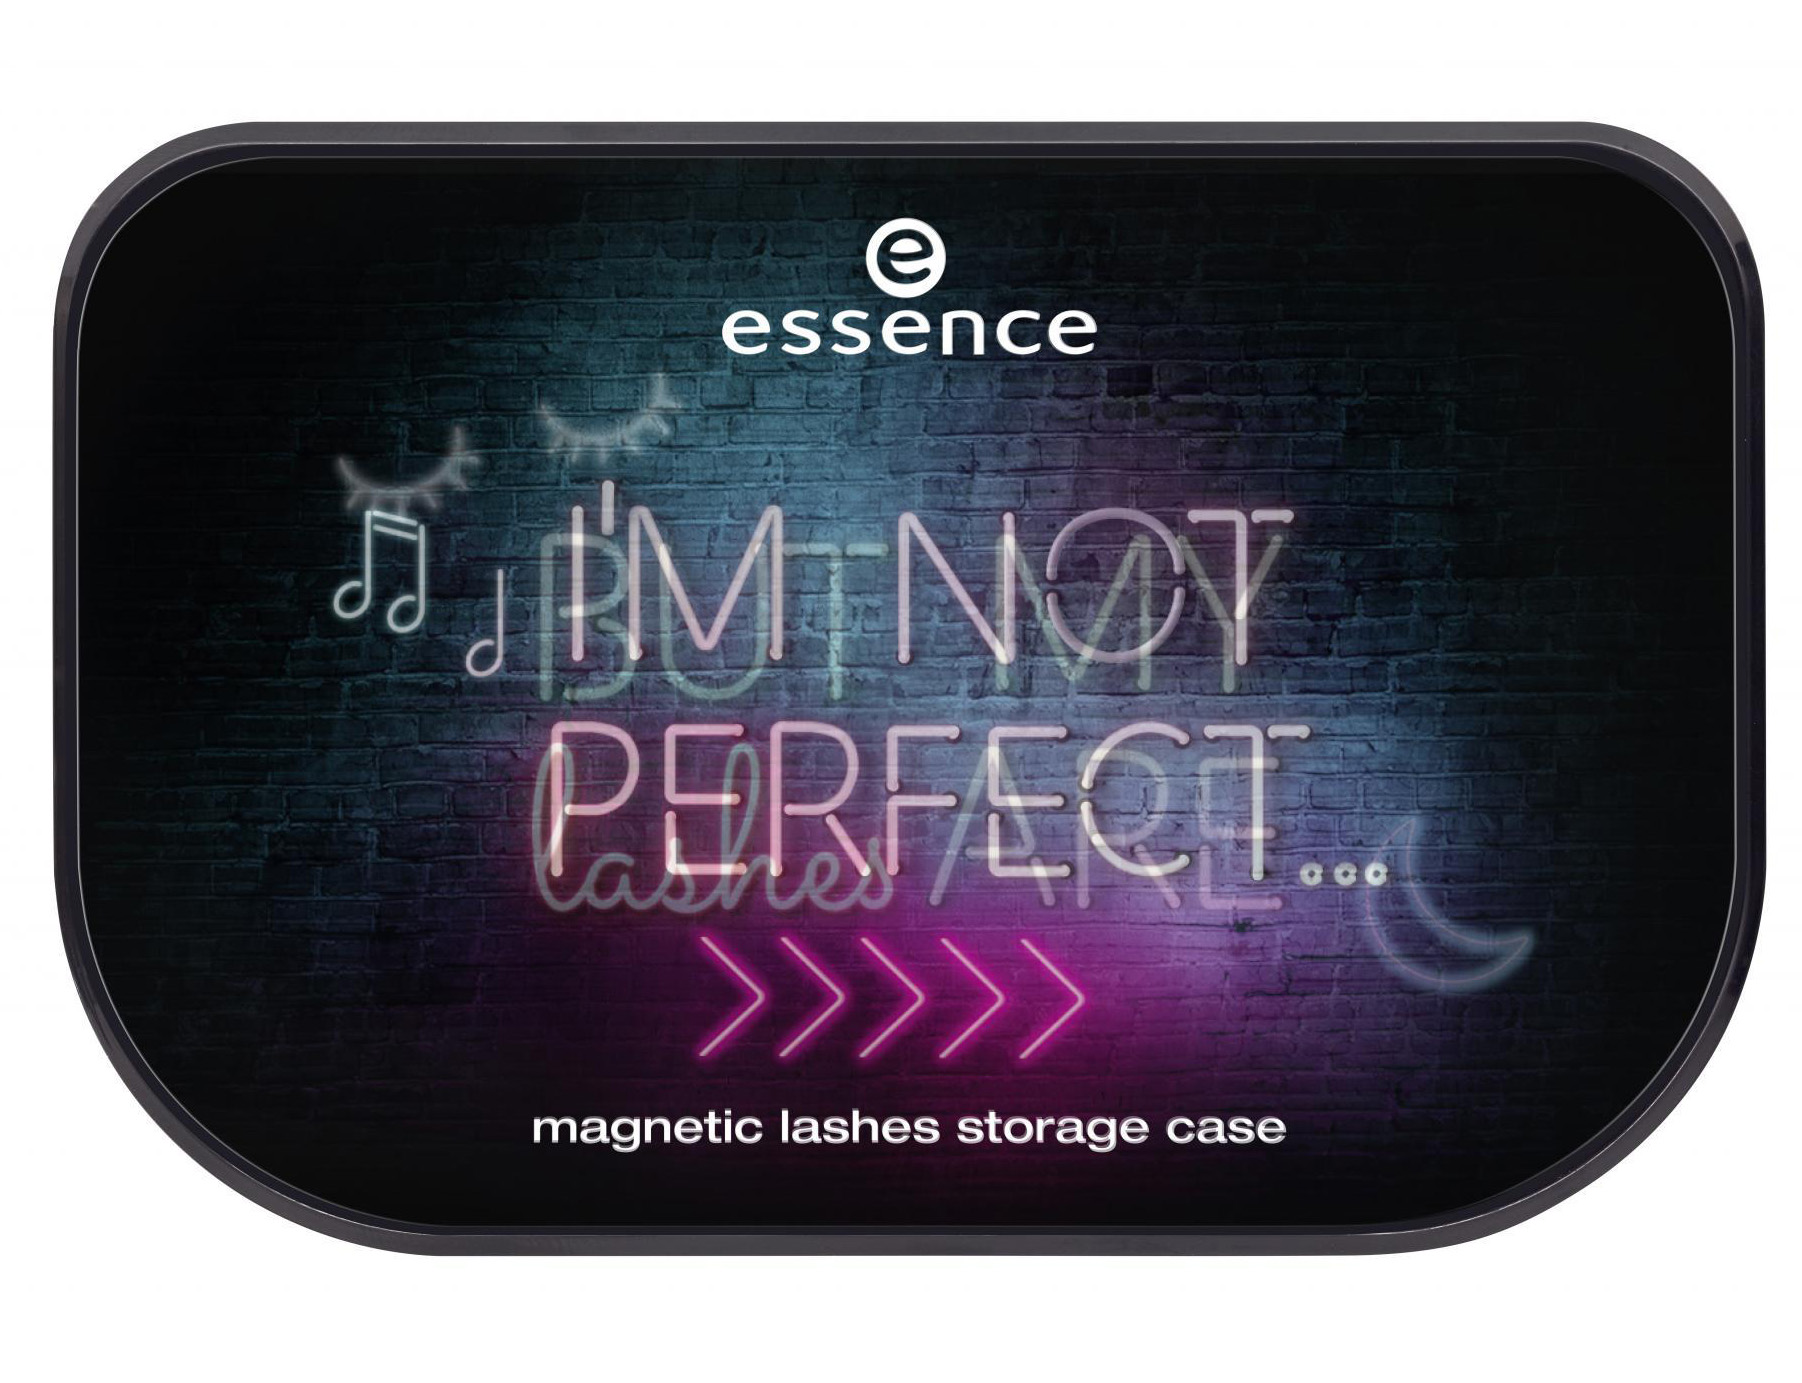 New Essence "Magnetic lashes"